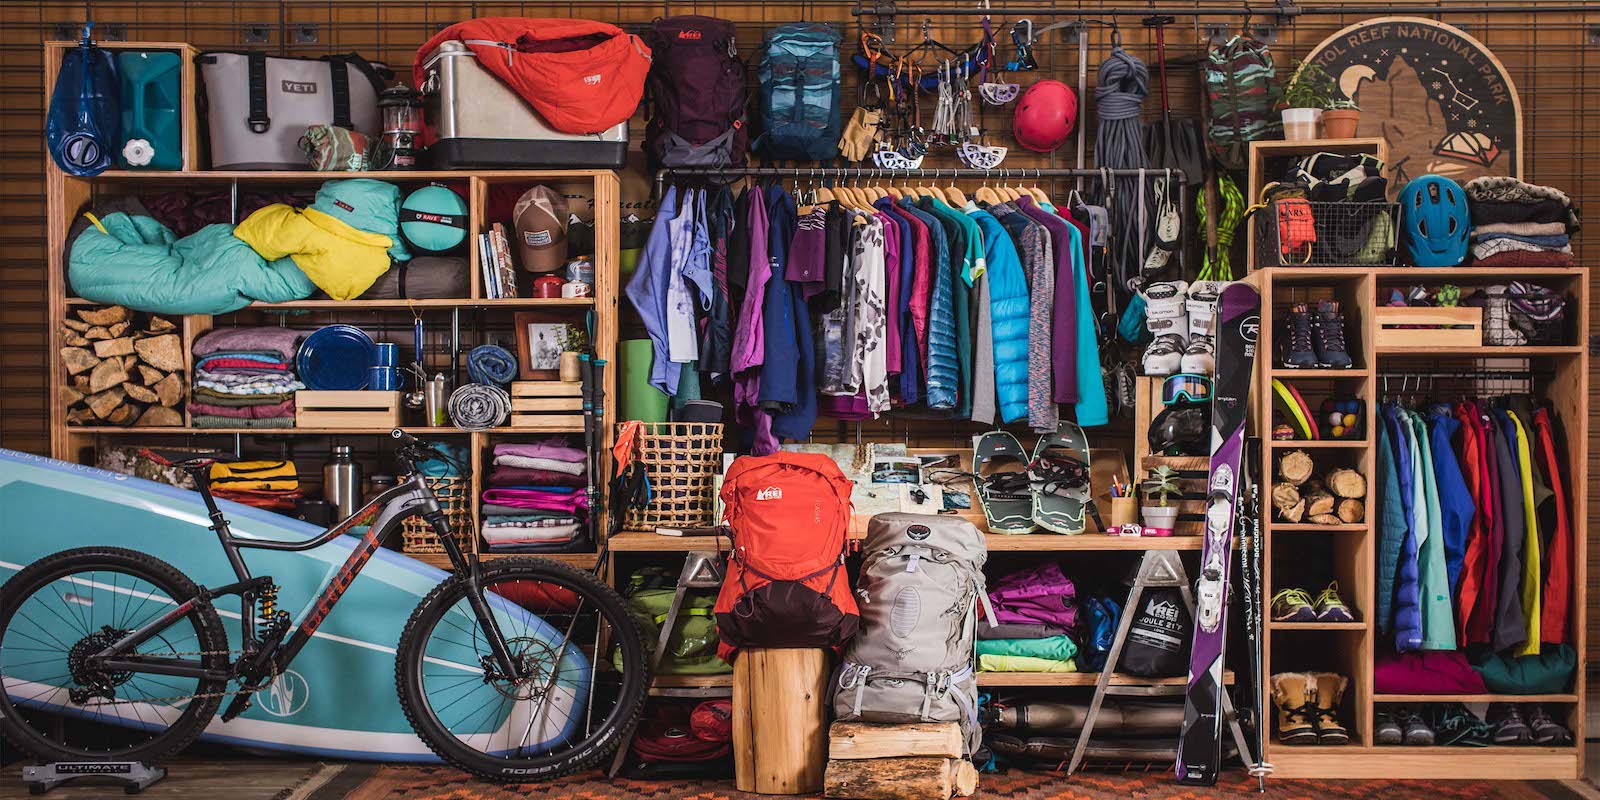 How to Buy Used Outdoor Gear and Clothing | REI Expert Advice